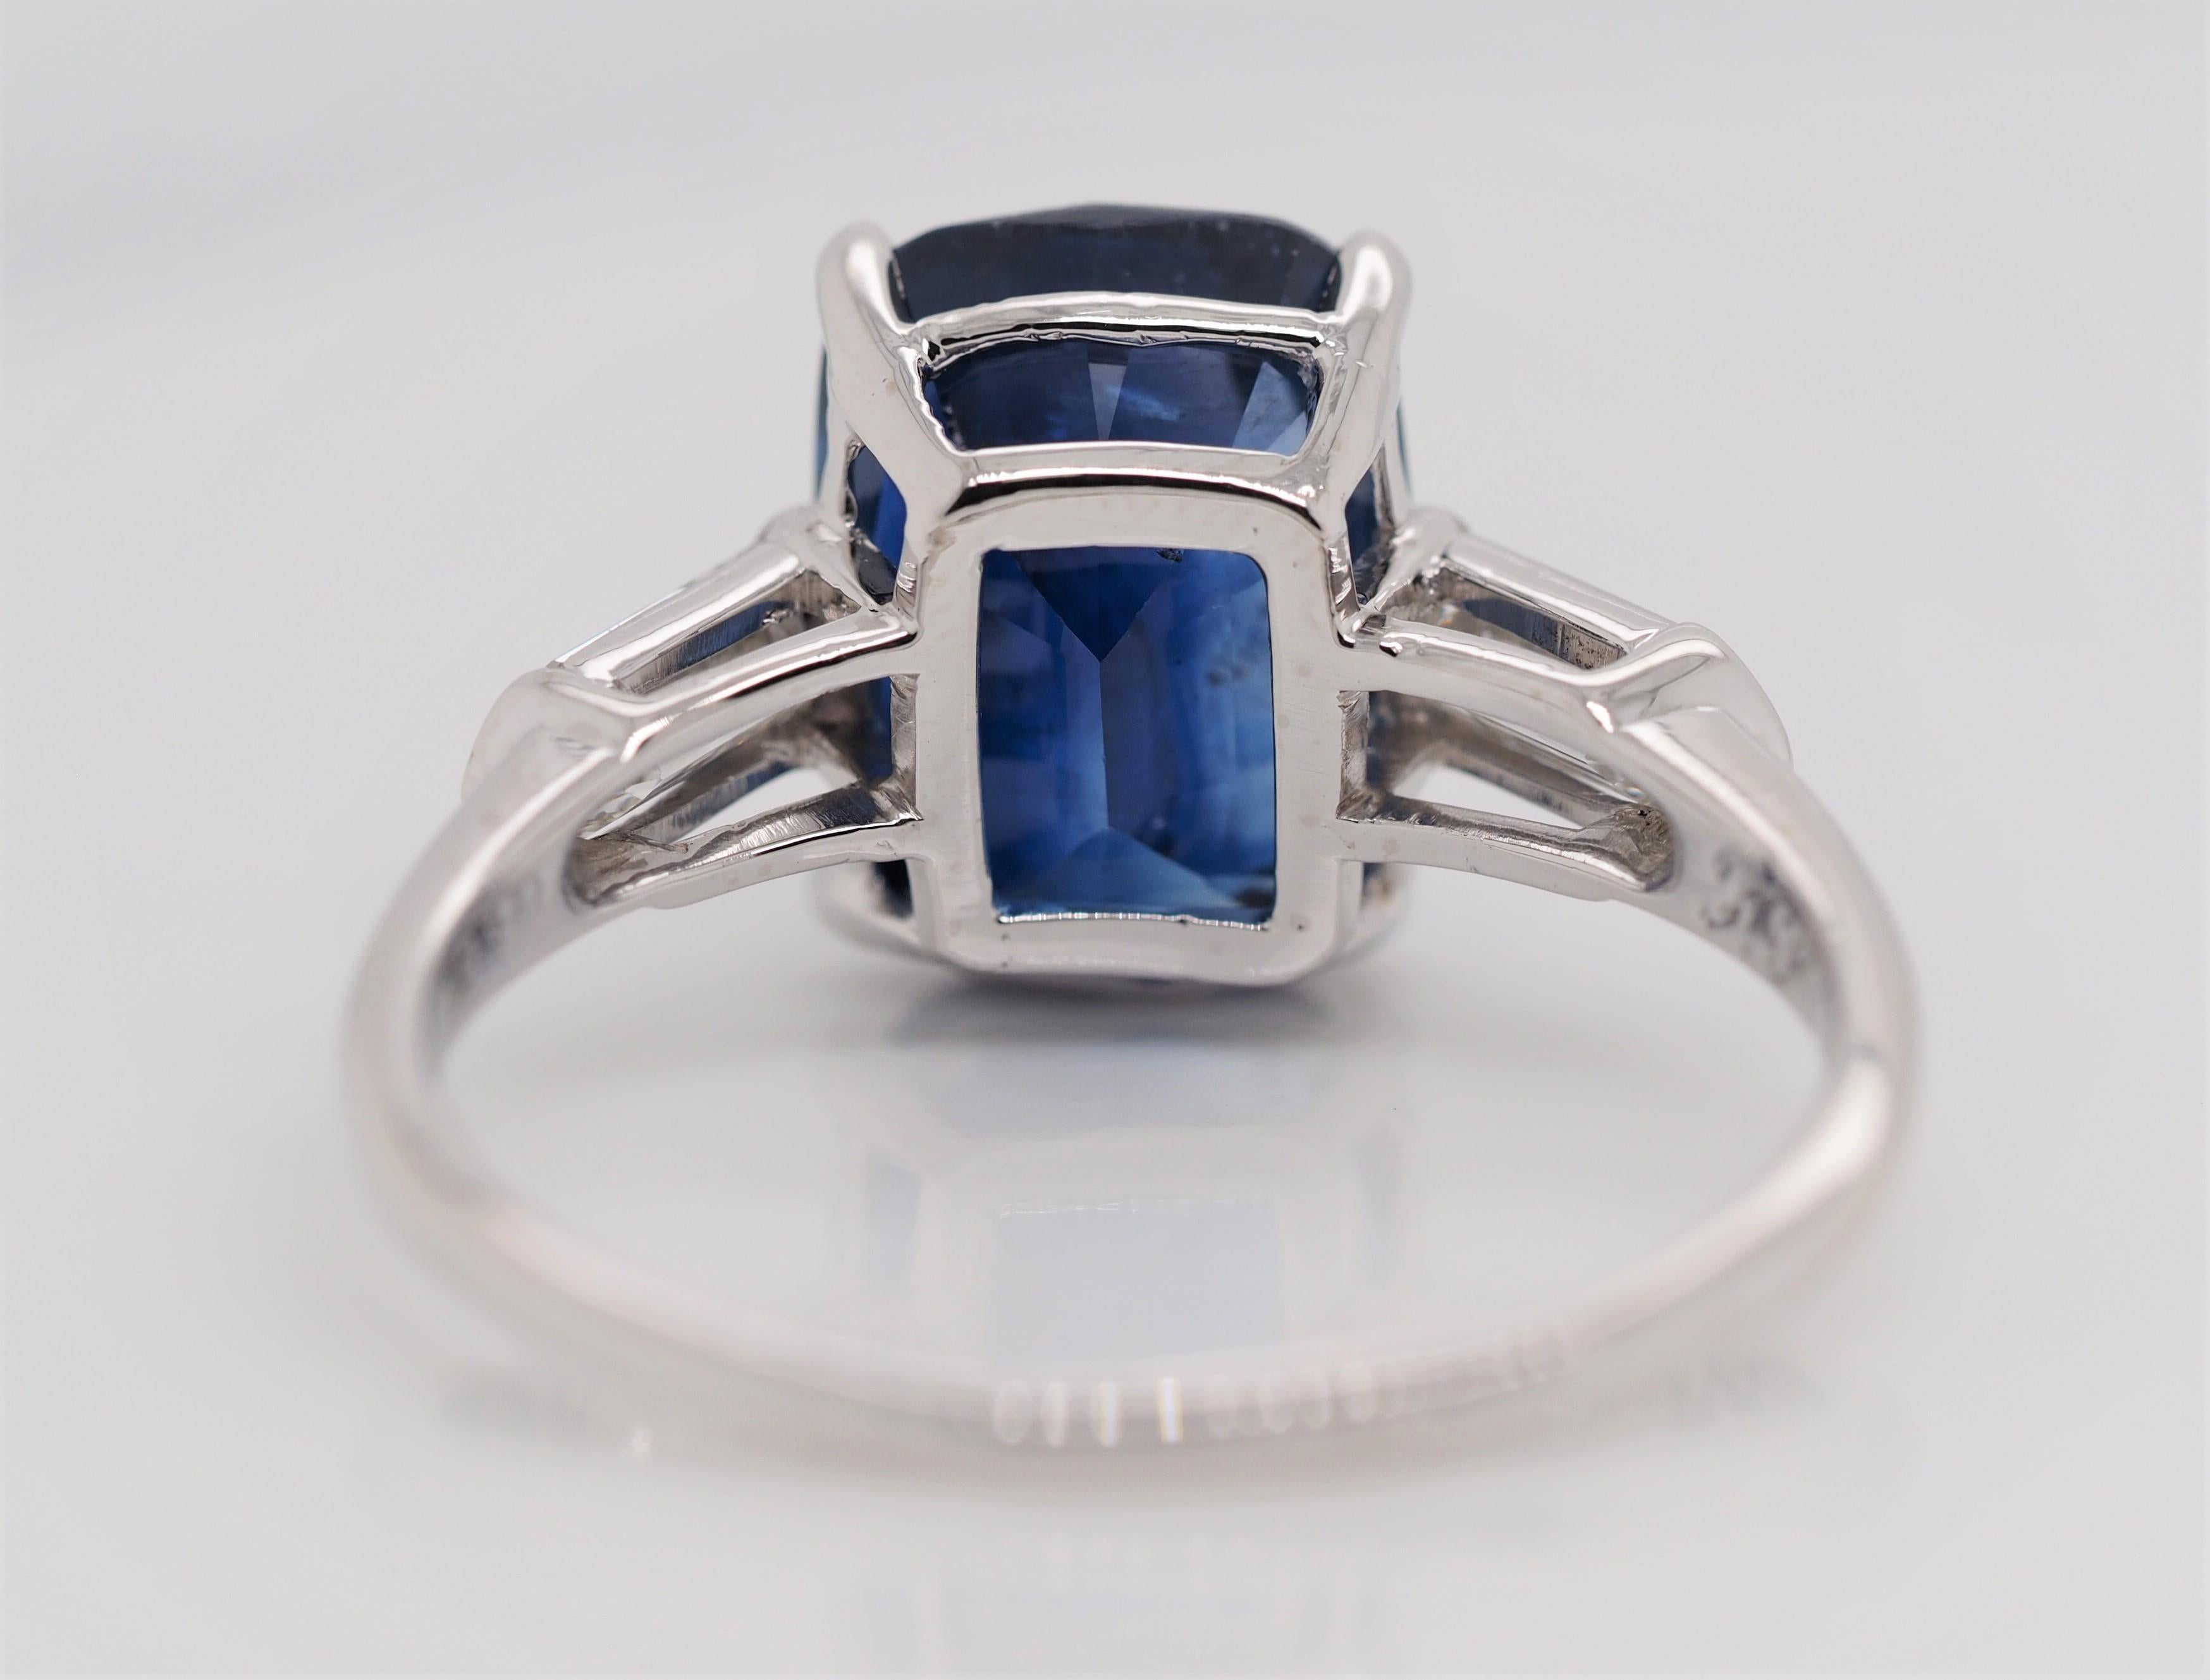 Bailey Banks and Biddle 6.97 Carat Sri Lanka Cushion Sapphire Diamond Ring GIA In Good Condition For Sale In Addison, TX